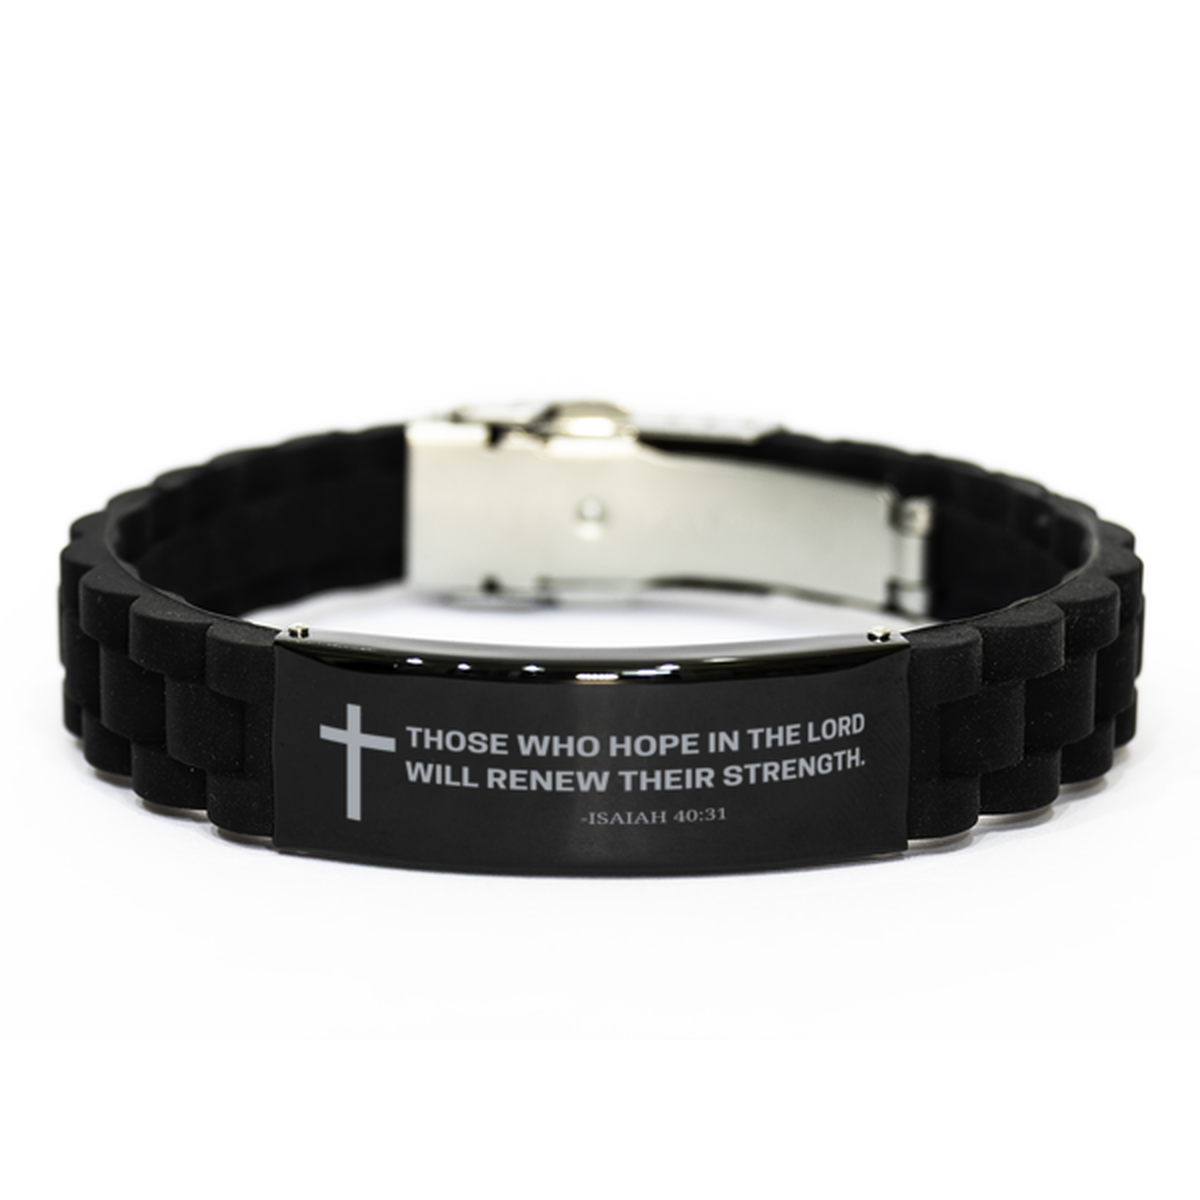 Baptism Gifts For Teenage Boys Girls, Christian Bible Verse Black Glidelock Clasp Bracelet, Those who hope in the Lord, Catholic Confirmation Gifts for Son, Godson, Grandson, Nephew